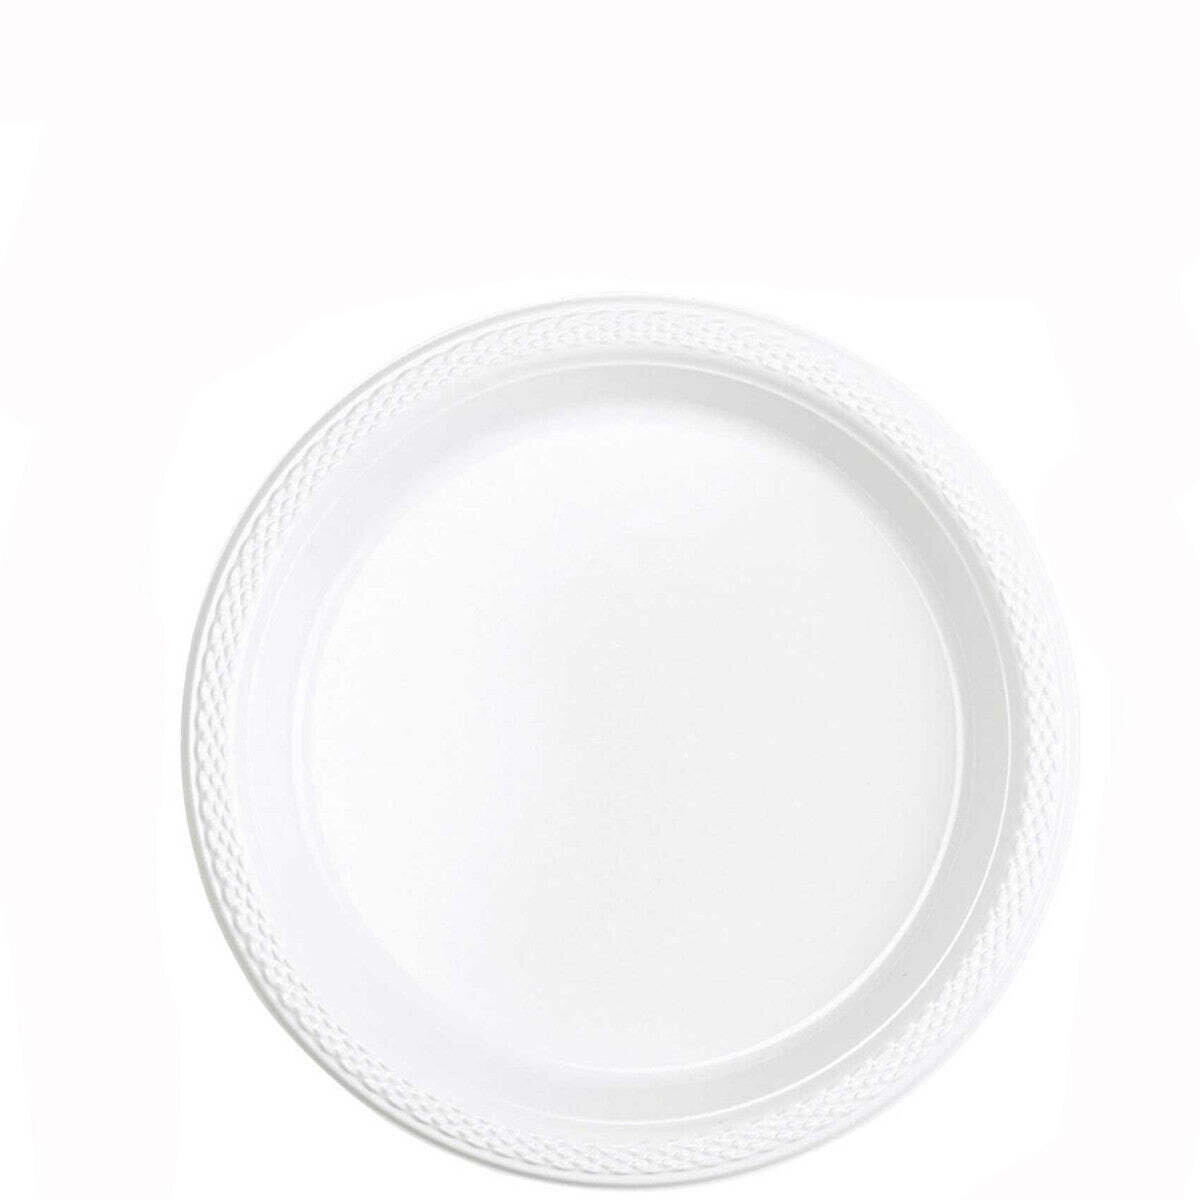 frosty white 7 inch plates